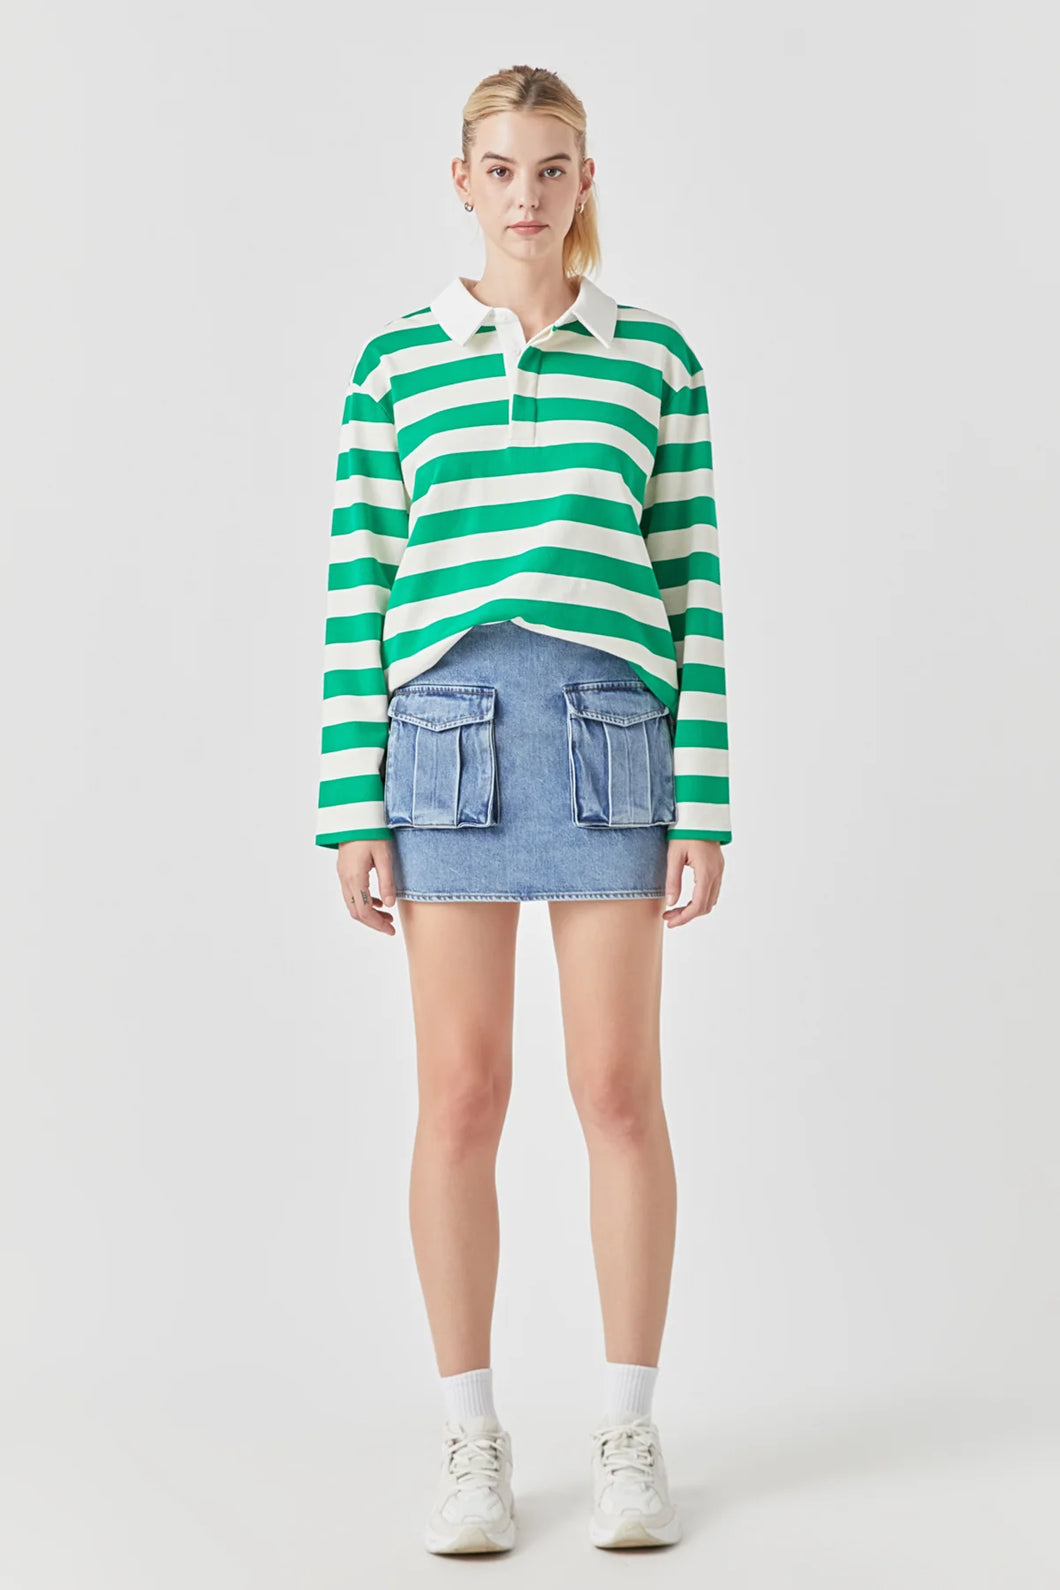 Green and White Stripe Collared top